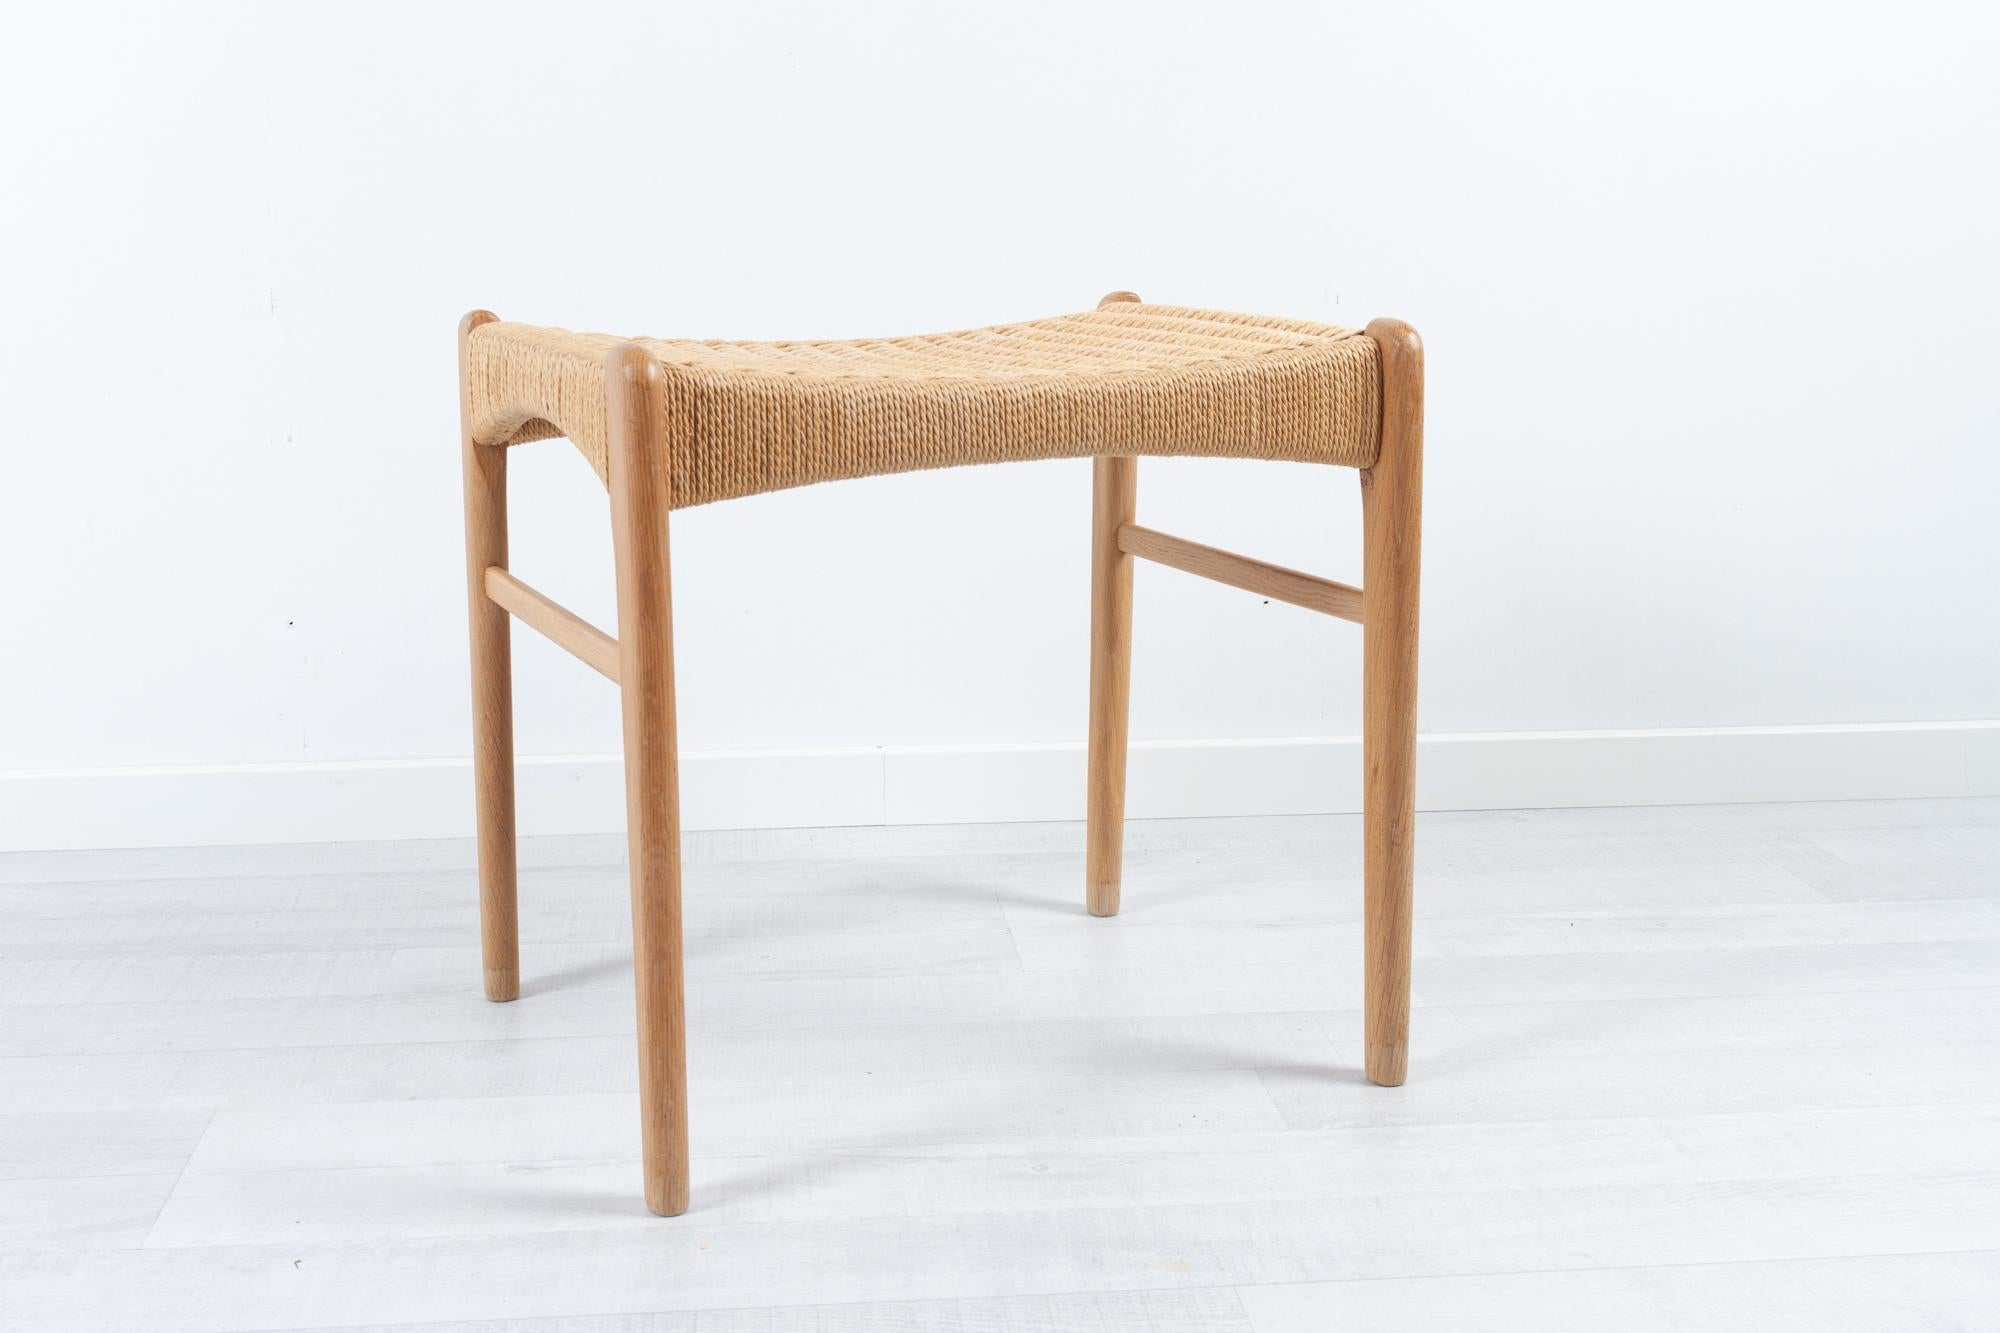 Vintage Danish Oak Stool by Glyngøre Stolefabrik 1960s
Danish mid-century modern stool in solid oak with woven Danish paper cord seat Model No. 85. Designed by Peder Kristensen for Glyngøre Stolefabrik, Denmark.
Very elegant footstool with rounded